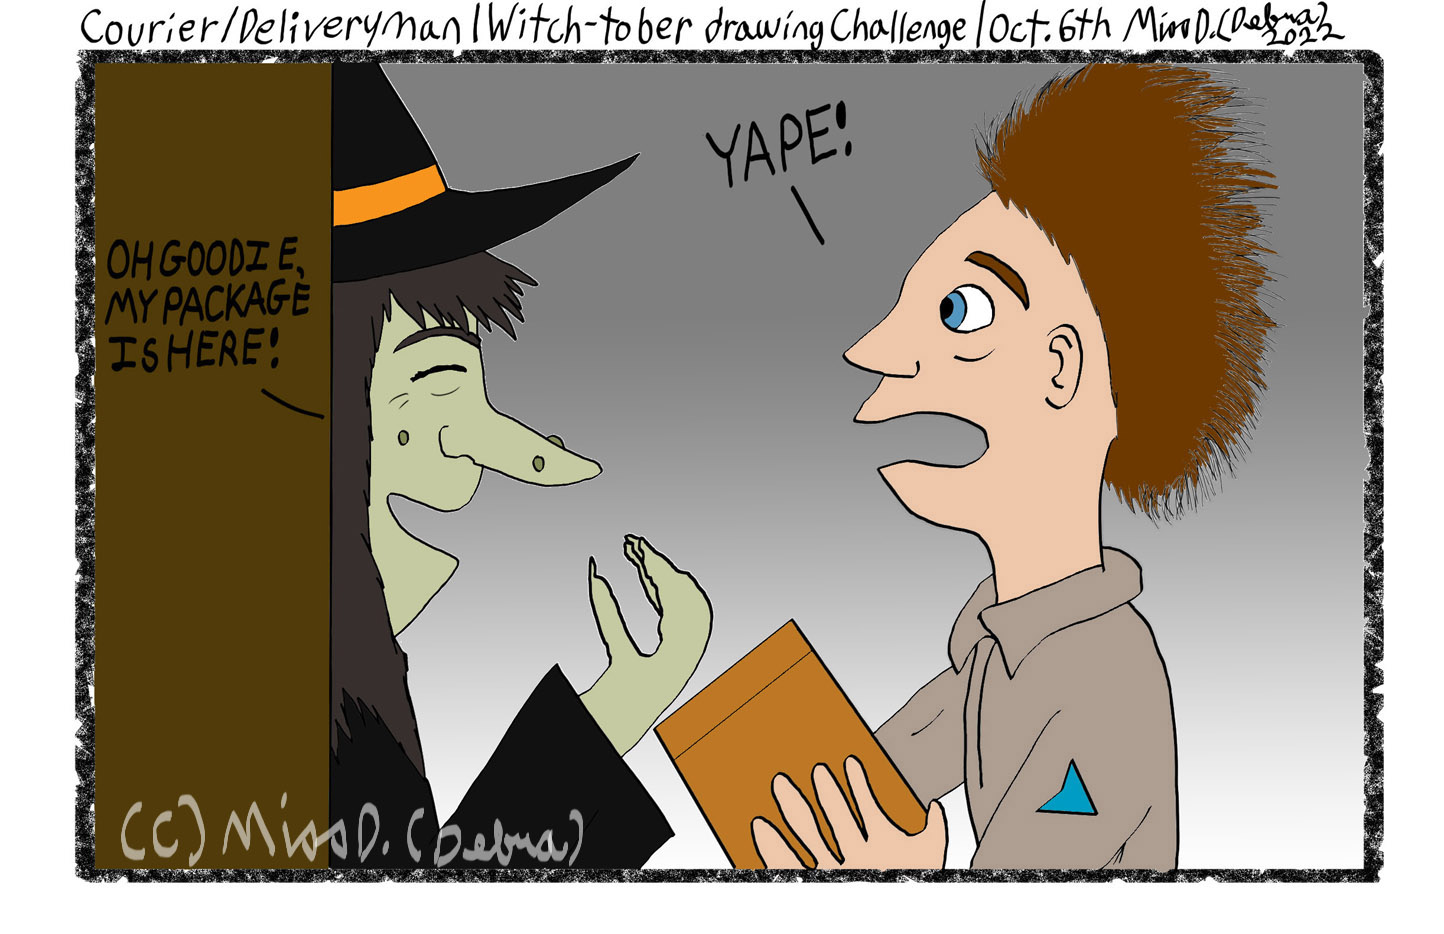 COURIER - Witch-Tober Drawing Challenge Oct. 6th